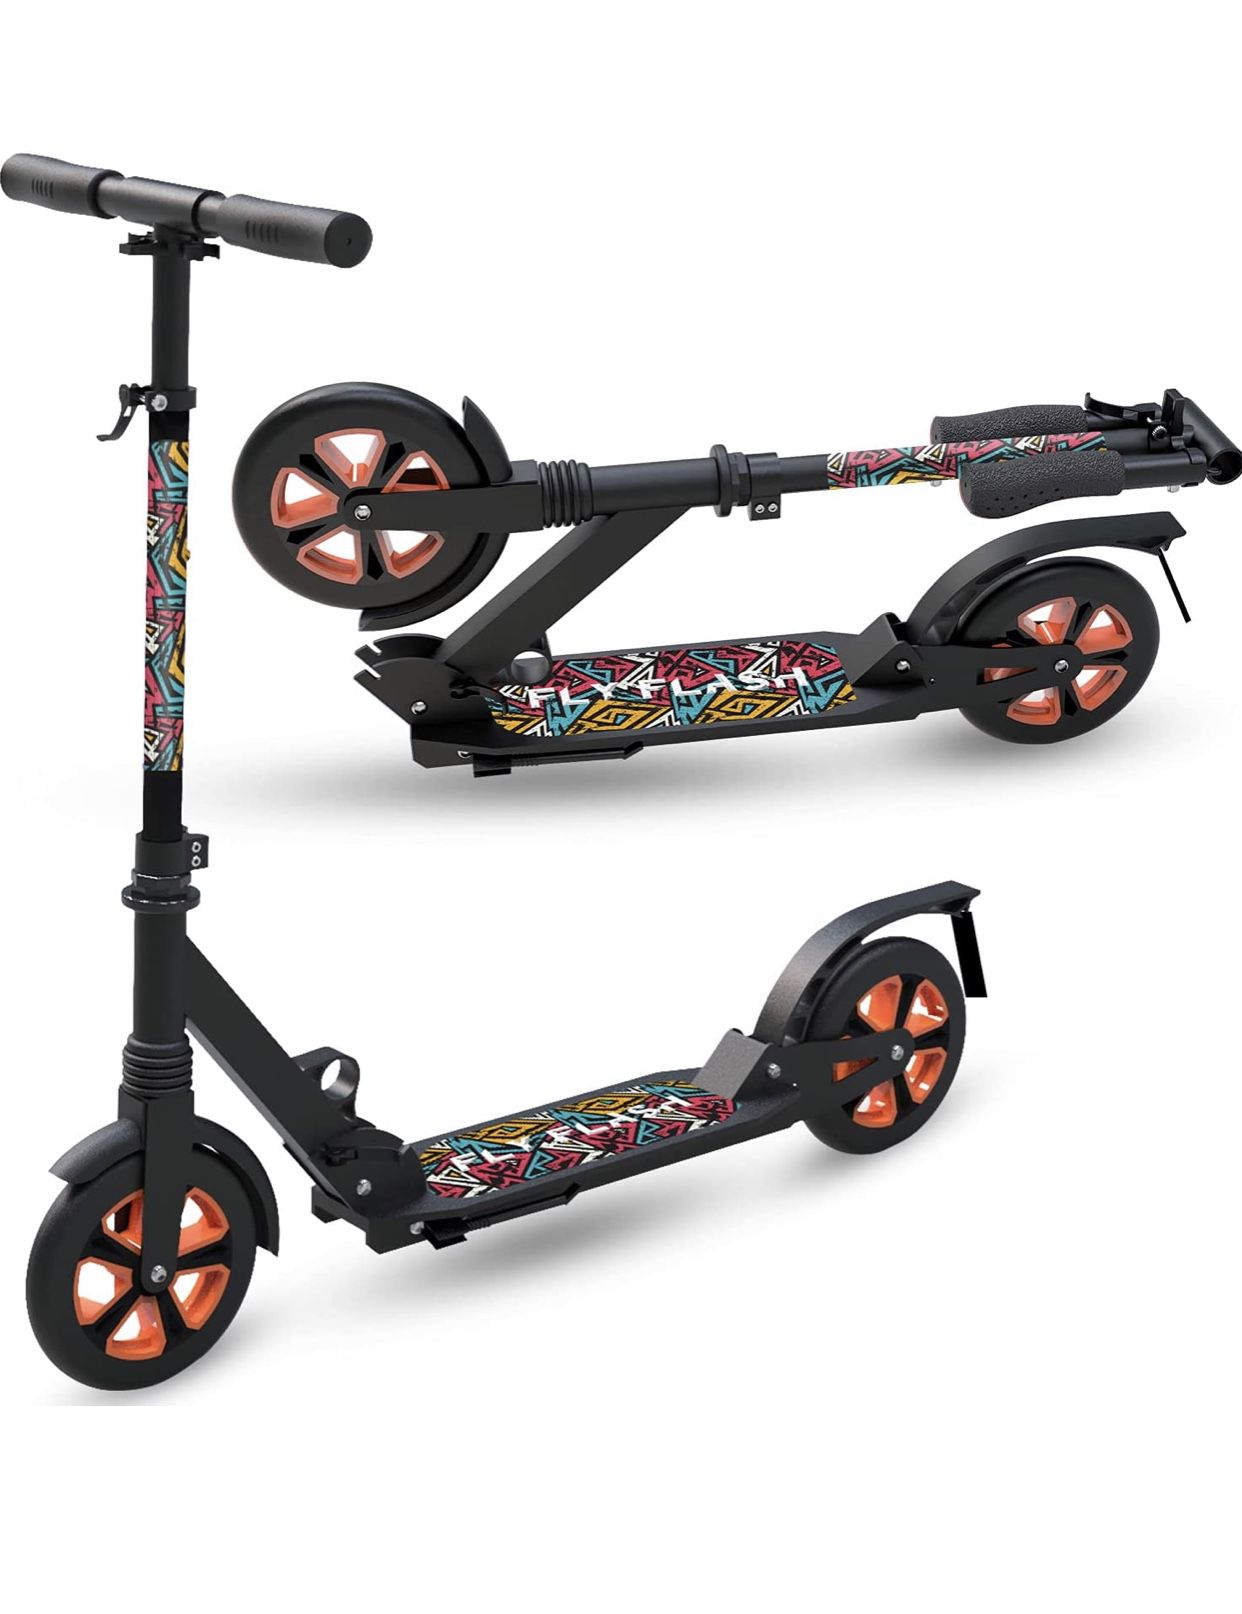 brand new 📦 Adult/Kid folding scooter - 330 Lbs weight capacity 🛴 original $90